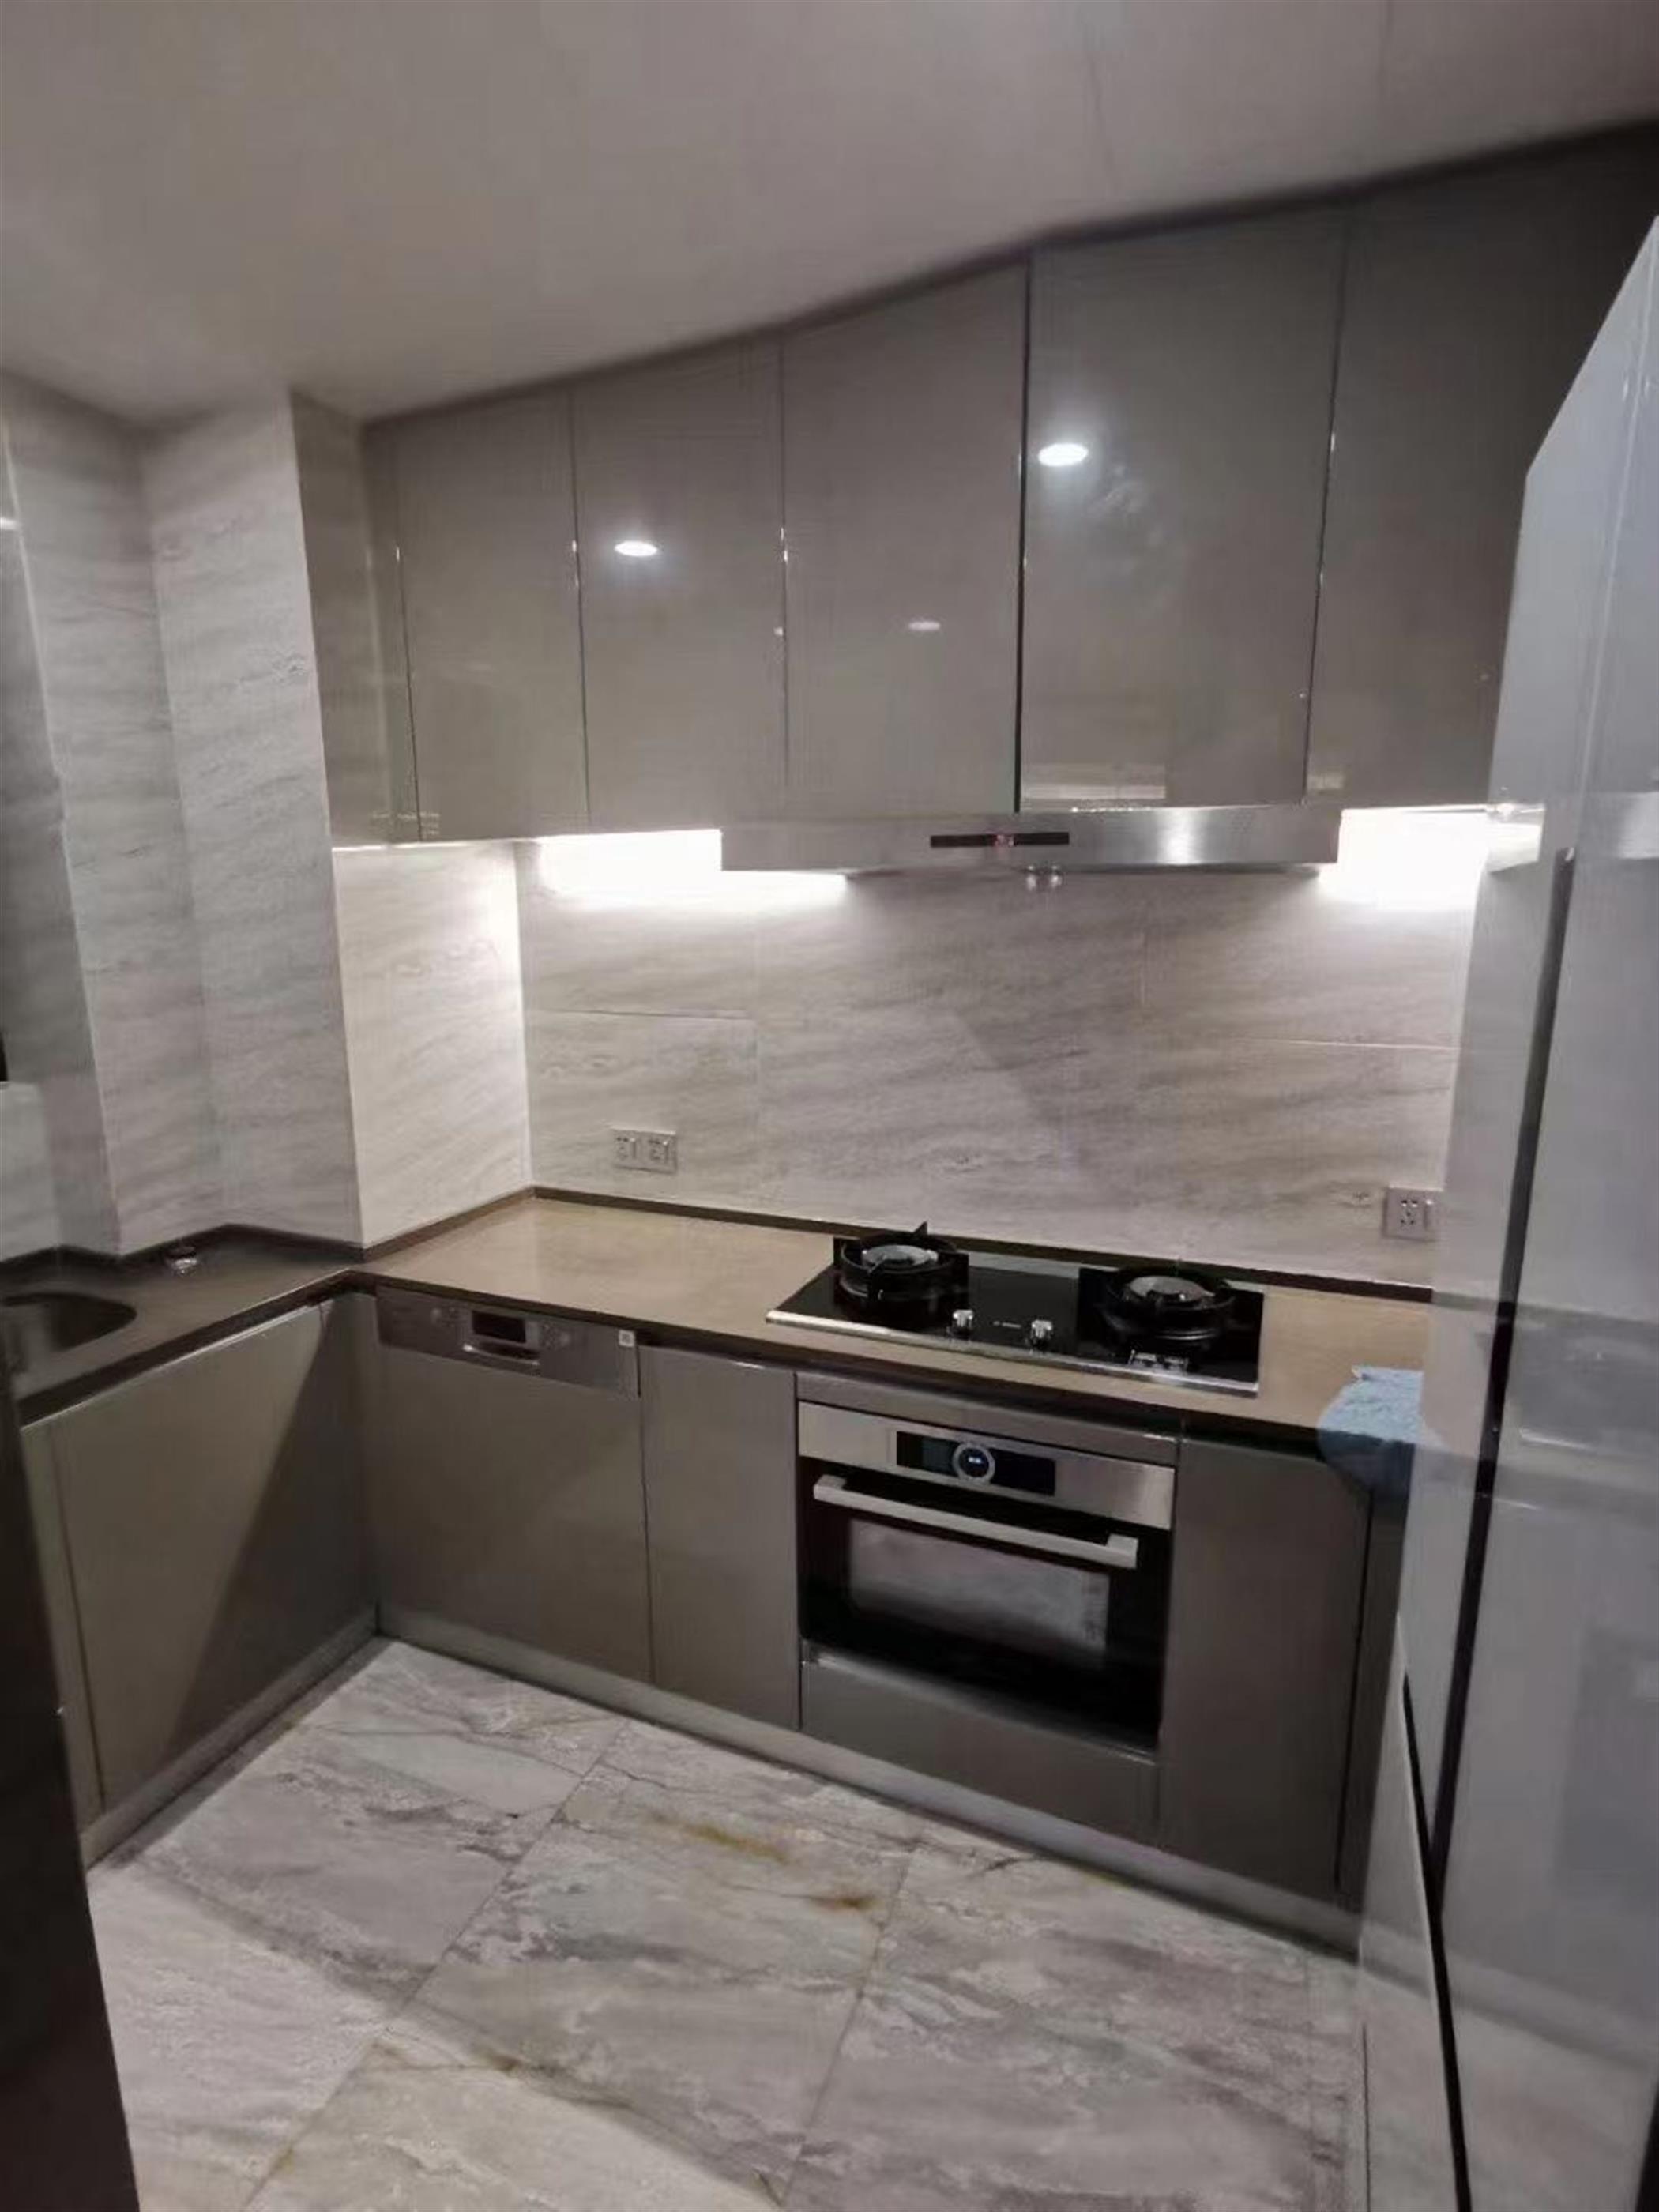 kitchen New Spacious Convenient Lux 3BR Gubei Apartment nr LN 2/15 for Rent in Shanghai